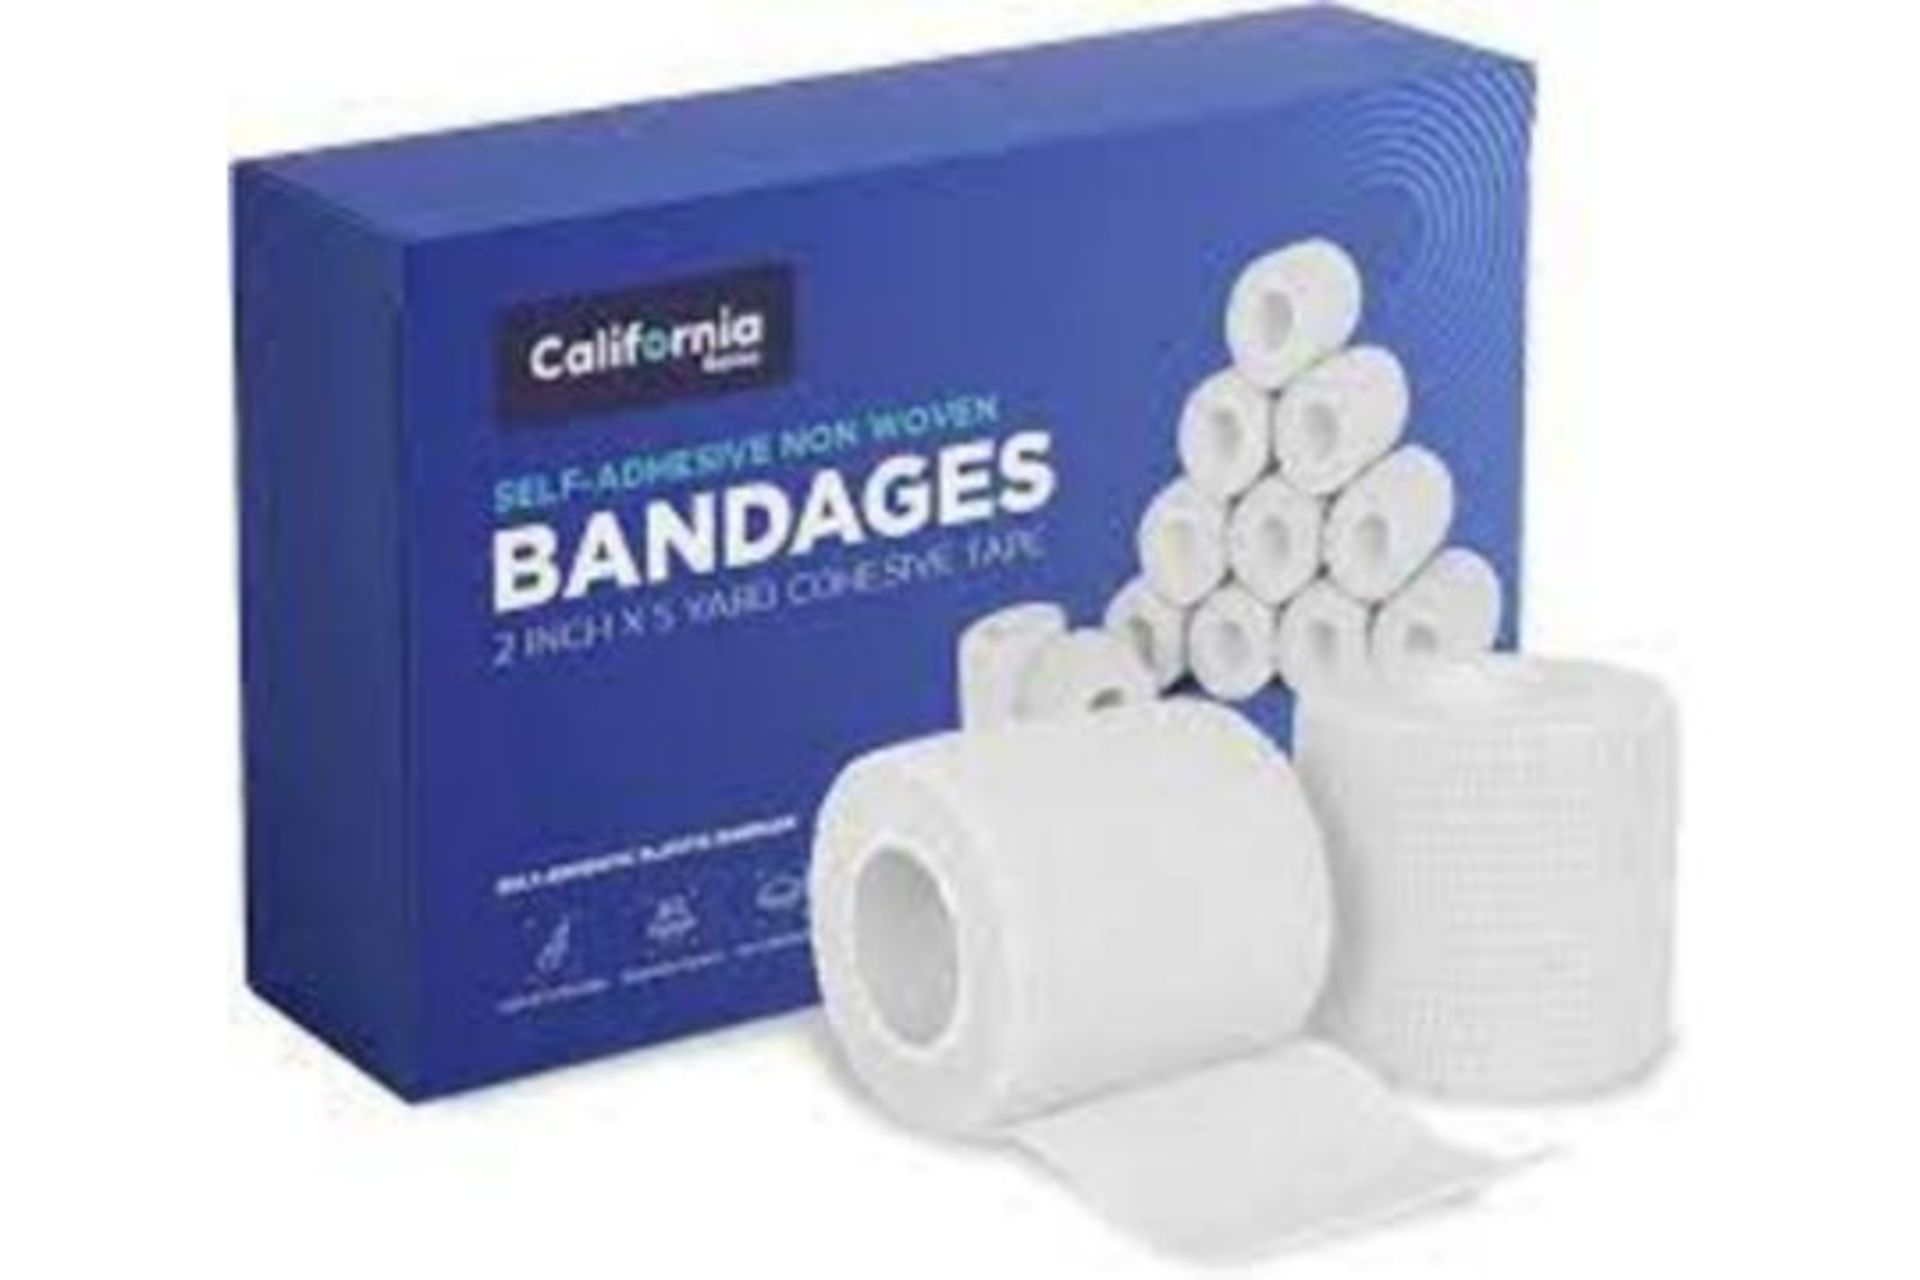 12 X BRAND NEW PACKS OF 24 CALIFORNIA SELF ADHESIVE NON WOVEN BANDAGES 2 INCH X 5 YARDS COHESIVE - Image 2 of 2